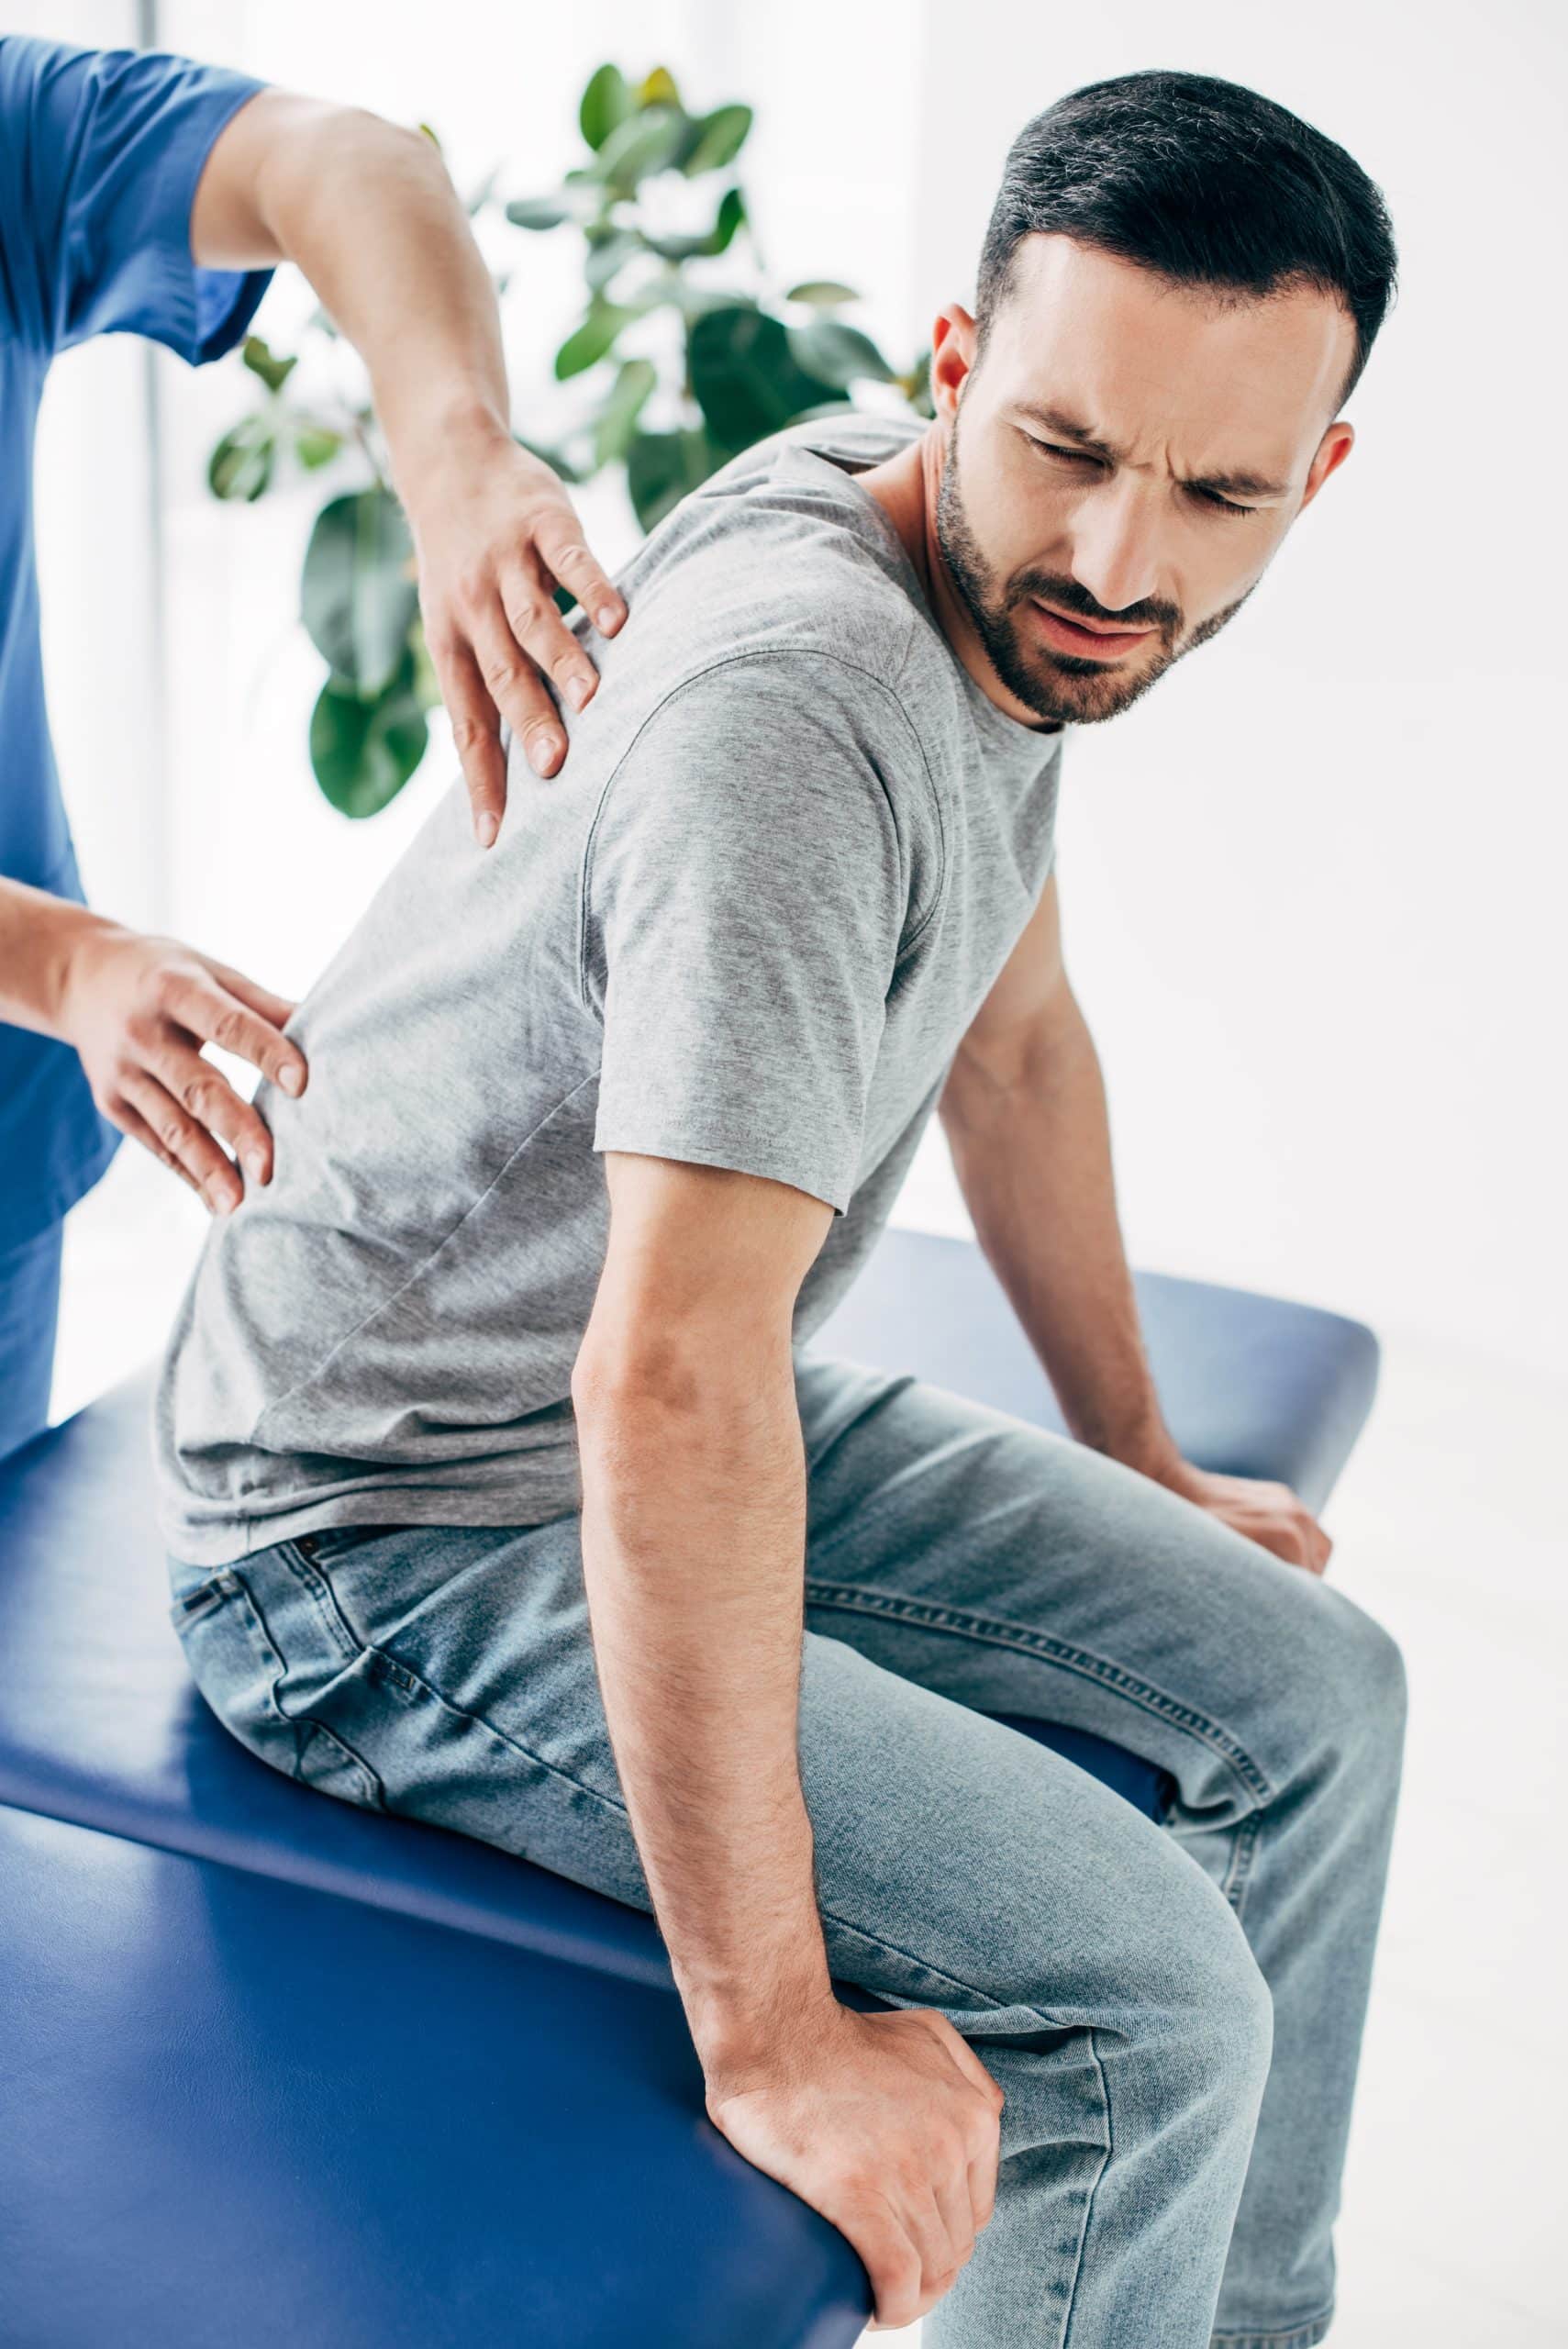 Chiropractor treating a patient's back.